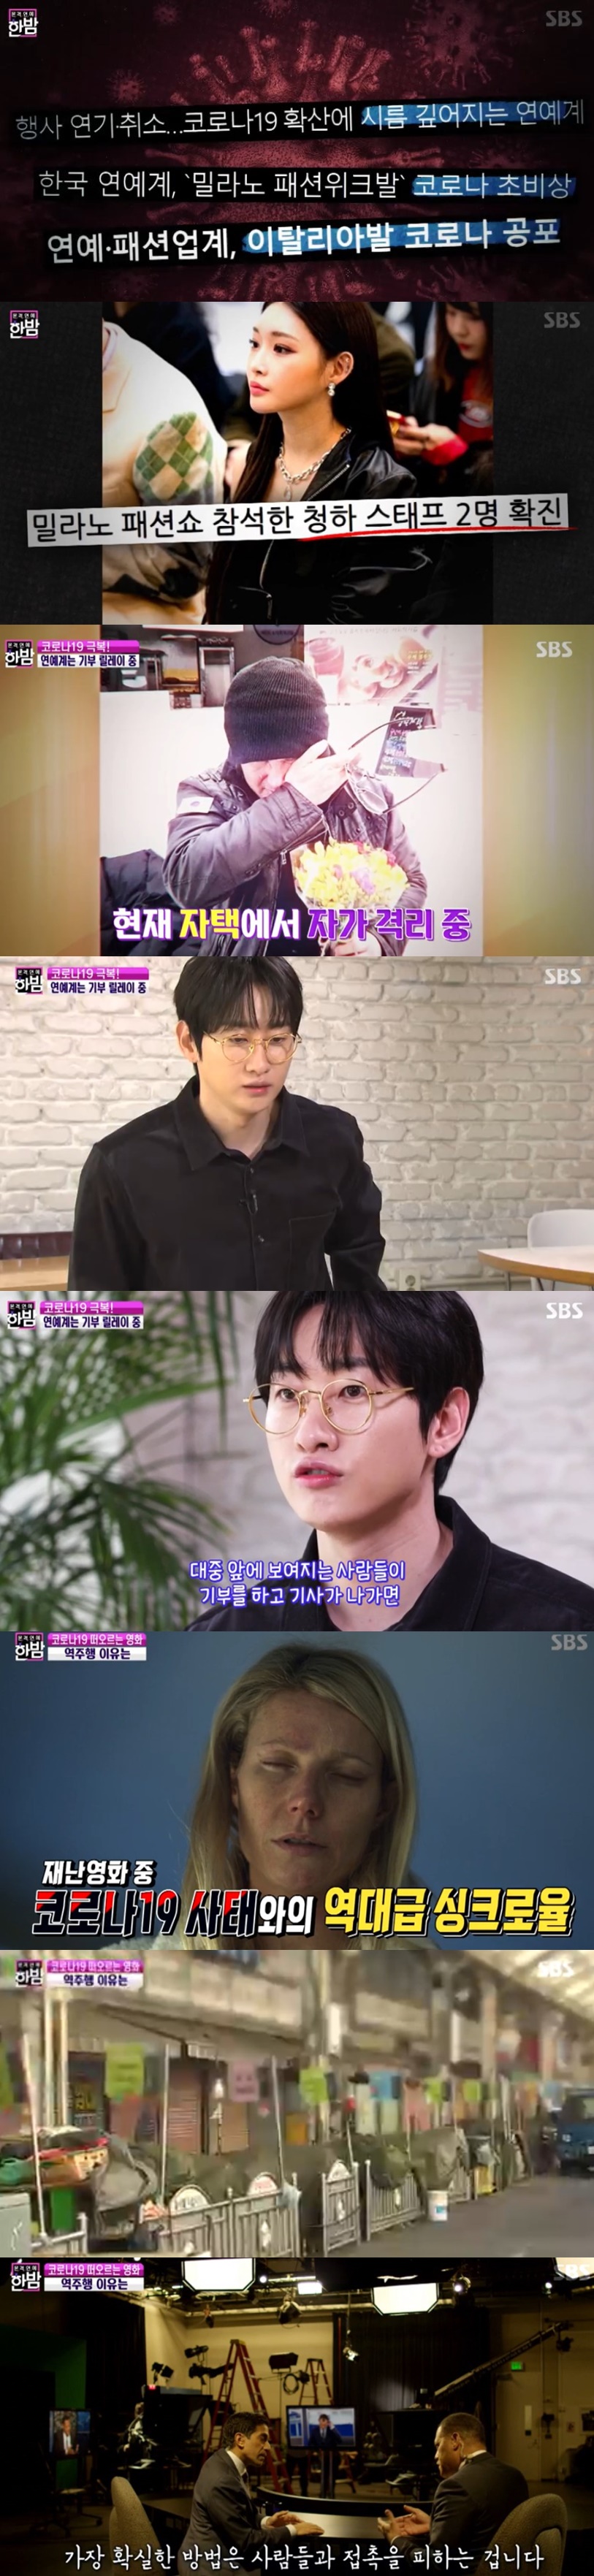 In the Midnight, Ahn Hyo-seop revealed the kissing scene behind Lee Sung-kyung.In the SBS entertainment program The Full Entertainment Midnight, which aired on the 4th, an interview by Ahn Hyo-seop, who played Seo Woo-jin of the romantic doctor Kim Sabu, was released.An interview with actor Ahn Hyo-seop, who completely played the role of Seo Woo-jin in the romantic doctor Kim Sabu, was also drawn.When asked if he was a real lover with his extraordinary chemistry with his partner Lee Sung-kyung, Ahn Hyo-seop said, I had a kissing god but I was so nervous.So I ate a bottle of wine and took a god. Ahn Hyo-seop said that a great effort followed to be able to fully digest the role of a doctor.In order to play the role of NTU Hospital Metro Station doctor, Kim Sabu team was surprised to know that he had visited the NTU Hospital Metro station directly.Ahn Hyo-seop was especially known to have practiced on the usual filming site.Kim Seo-hyung, who plays Detective in No One, said, I am trying to wear fashion for the role this time. I tried to wear simple but sophisticated clothes because it is a detective role.He then laughed, saying, I am so good at digestion.Kim Seo-hyung said, I do not think I should say anything about this ending, he said. There will be a reversal somewhere.Kim Seo-hyung promised to play MC in the night on the 15% pledge of audience rating.It was discussed about the donation procession of the entertainment industry to overcome the Corona 19 virus damage.Kim Bo-sung, who supported 12,000 masks to Deagu from Park Hae-jin, who supported video production expenses for Corona prevention measures, continued.In particular, it was known that the citizens who received the mask delivered by Kim Bo-sung were tearful.Kim Bo-sung told the midnight production team that he wanted to go and give a mask because he knew that Deagu citizens were really hard.This time, I was allowed to kneel, and once I am alone, I hope that the citizens of Deagu will overcome it with righteousness. Eun Hyuk, who made a donation of 100 million won, said, My mother was sick, but I donated to Coronaro in the hope that there would not be sick people like my mother. I hope that those who have been struggling with this virus and those who are working hard will be able to work hard.A reverse movie that emerged as Corona 19 was introduced, and it was called Corona reality because it noted bats as the source of the virus.The films content director said, They all thought it was a predictable problem.I think it was realistic to express the infection easily with hands and faces, the specialist said. There is no virus without a latency period.In that sense, the virus has progressed too quickly. All disasters and adversity must be overcome together, of course, thats not easy, said Kim Sung-soo, director of the movie Cold.Critics explained that when people look at the process of overcoming people like two movies that have a happy ending, people tell them that they overcome and overcome this process.Chang Woo Young, who was released on the 28th of last month, said, Corona 19 has left the whole area right away from the last vacation.I was really sorry, he said. I thank the motives and seniors who have been good at it for this.Chang Woo Young, who showed his gratitude to Twice and ITZY during his military career, attracted attention by saying, I was able to hold on really well.In particular, Chang Woo Young said, I feel really whole, attracting attention by dancing the dance properly.Especially, I showed a smile by showing my own dance with my mother.Chang Woo Young said, I am so grateful for the joy of the whole world. I will be a vitamin that gives you a smile now.I didnt know that Bong Joon-ho would mention us, said Yoon Se-yoon, who also dealt with the parody of Yoo Se-yoon and Moon Se-yoon, who parodied the recent topic of Sharon Choi and Bong.I am so grateful, he said.The parody was followed by a series of parody, from advertising to posters, and the parody was reported to have increased sales by 5 to 10 percent.The air forces Le Mighterable, which parodied the movie Les Miserables, was also mentioned by Russell Crowe and collected topics.The movie The Animals Who Want to Hold the Jeep was also noted as a parody of Hong Hyun-hee and Jay-Won before the release.Hong Hyun-hee and Jay-Won received the attention of netizens as a god who showed affection for chicken under the title of Animals Wanting to Eat Even a Jeep.